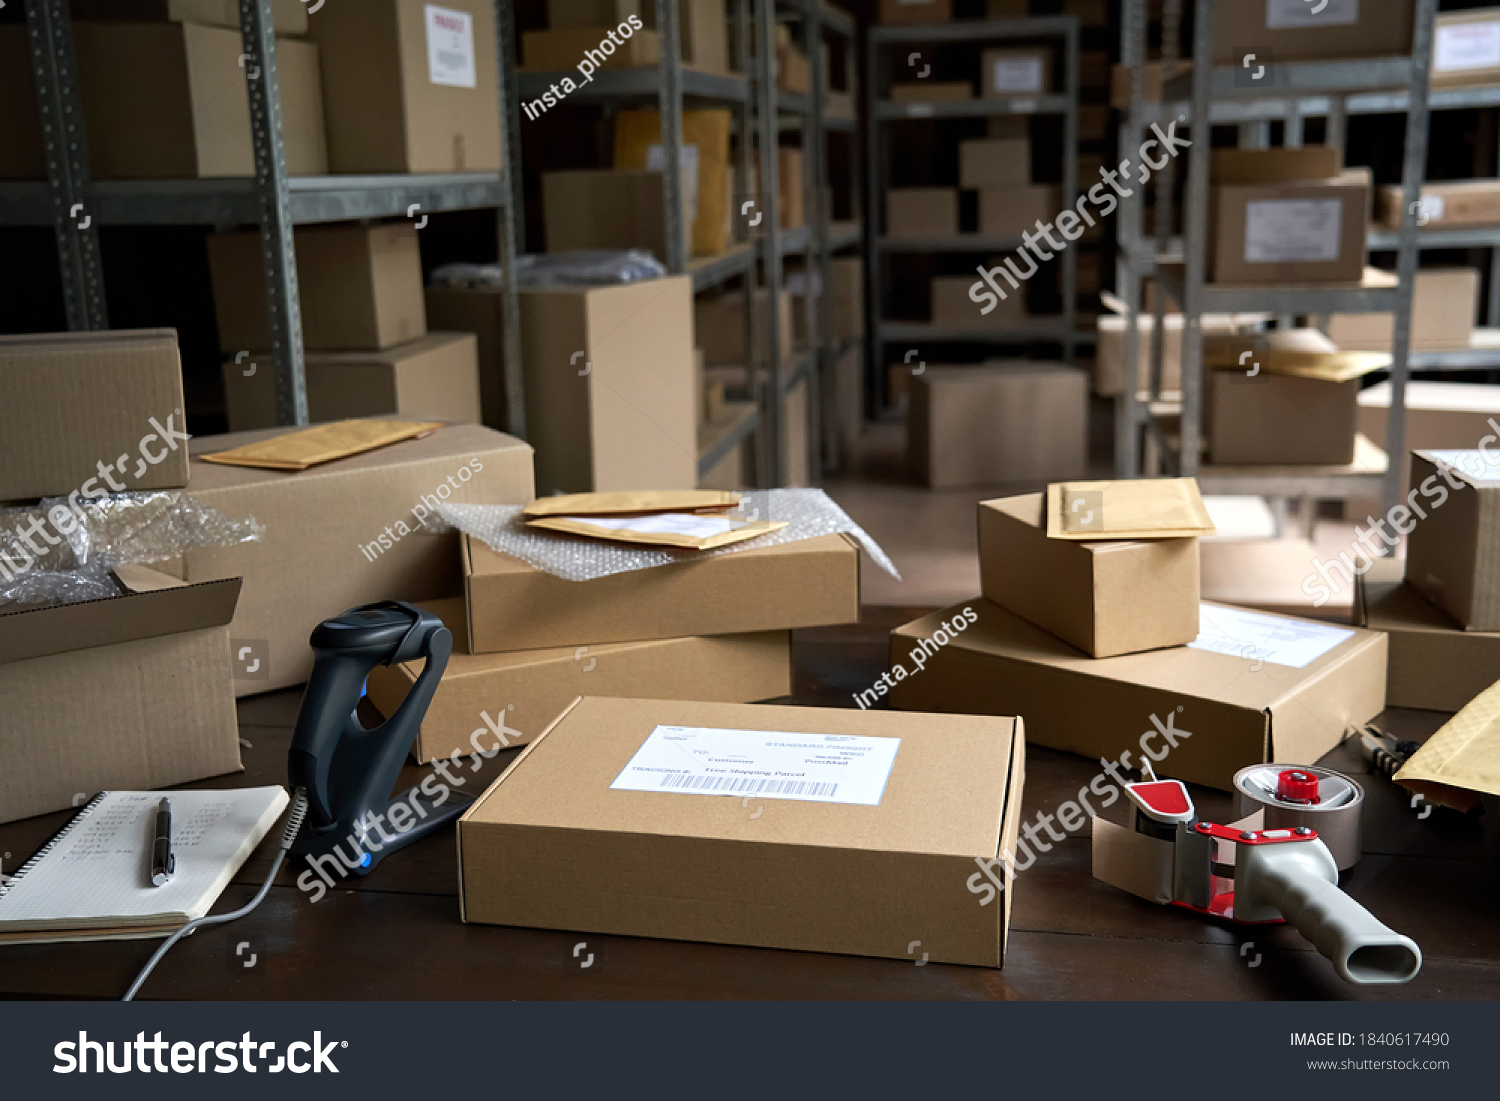 Distribution warehouse background, commercial shipping order boxes for dispatching on stockroom table, post courier delivery package, dropshipping commerce retail store shipment storage concept. #1840617490